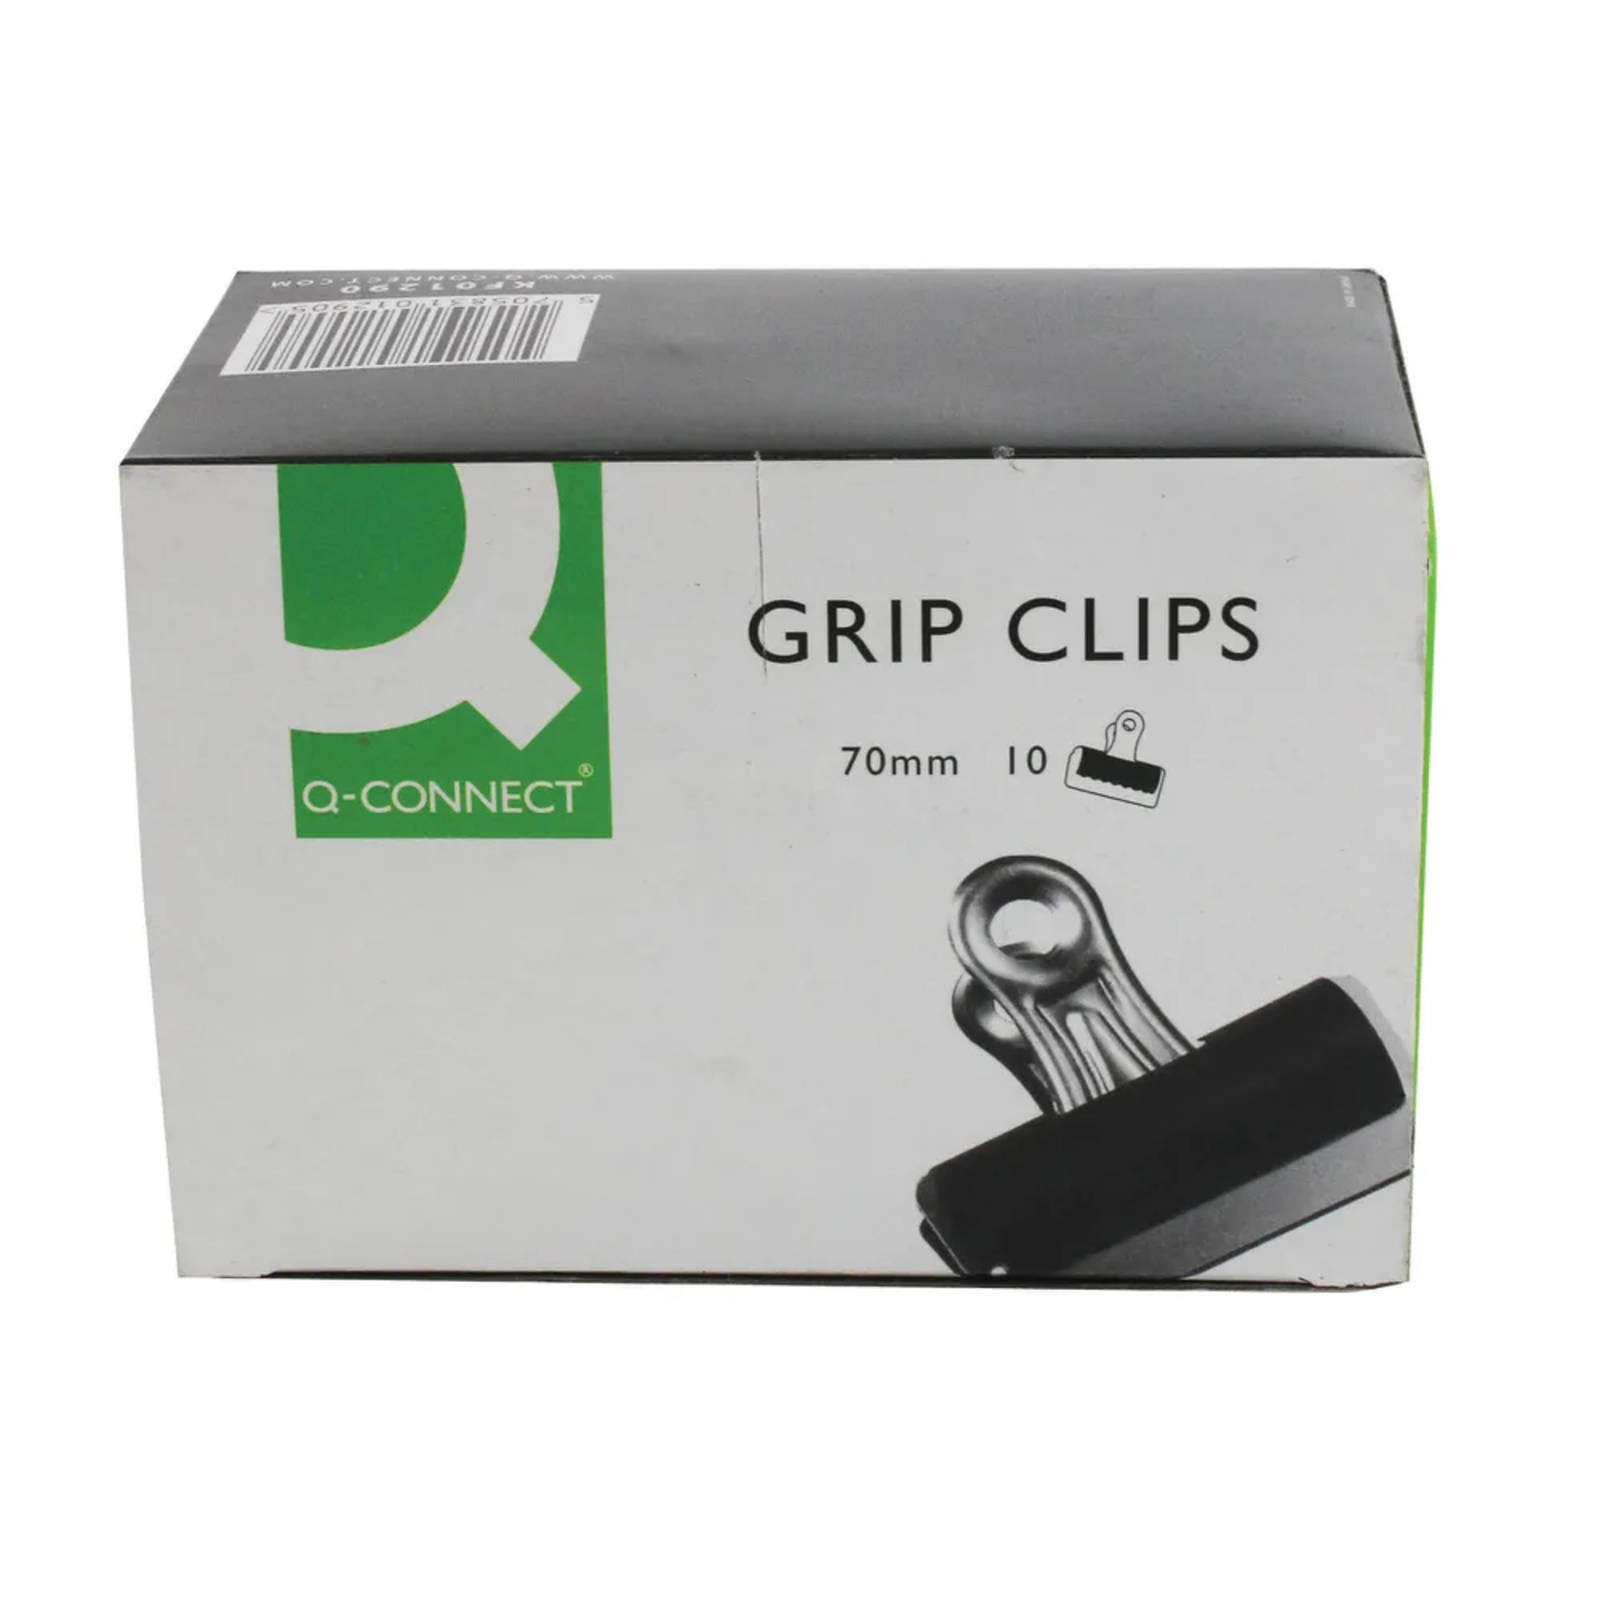 Q-Connect Grip Clip 70mm Black (Pack of 10) KF01290